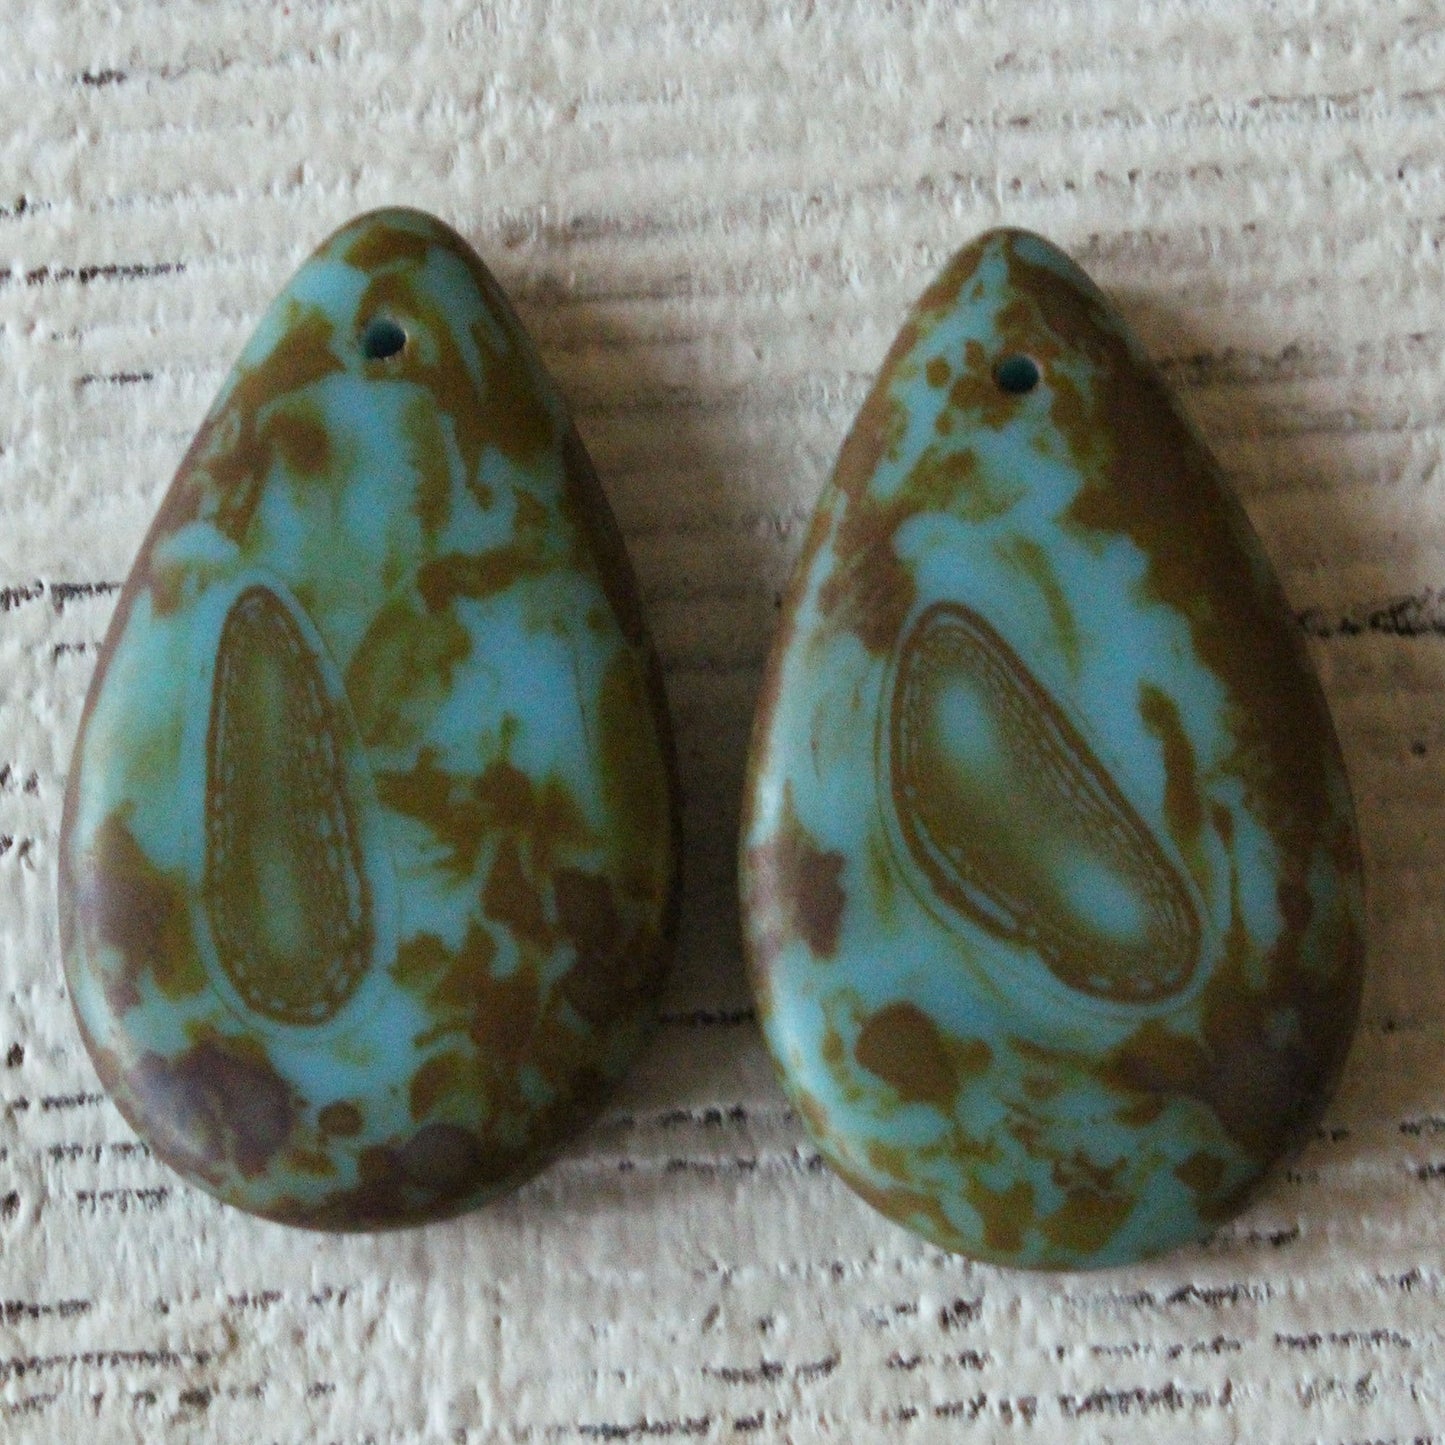 30x18mm Large Flat Teardrop Beads - Picasso Beads - 10 beads